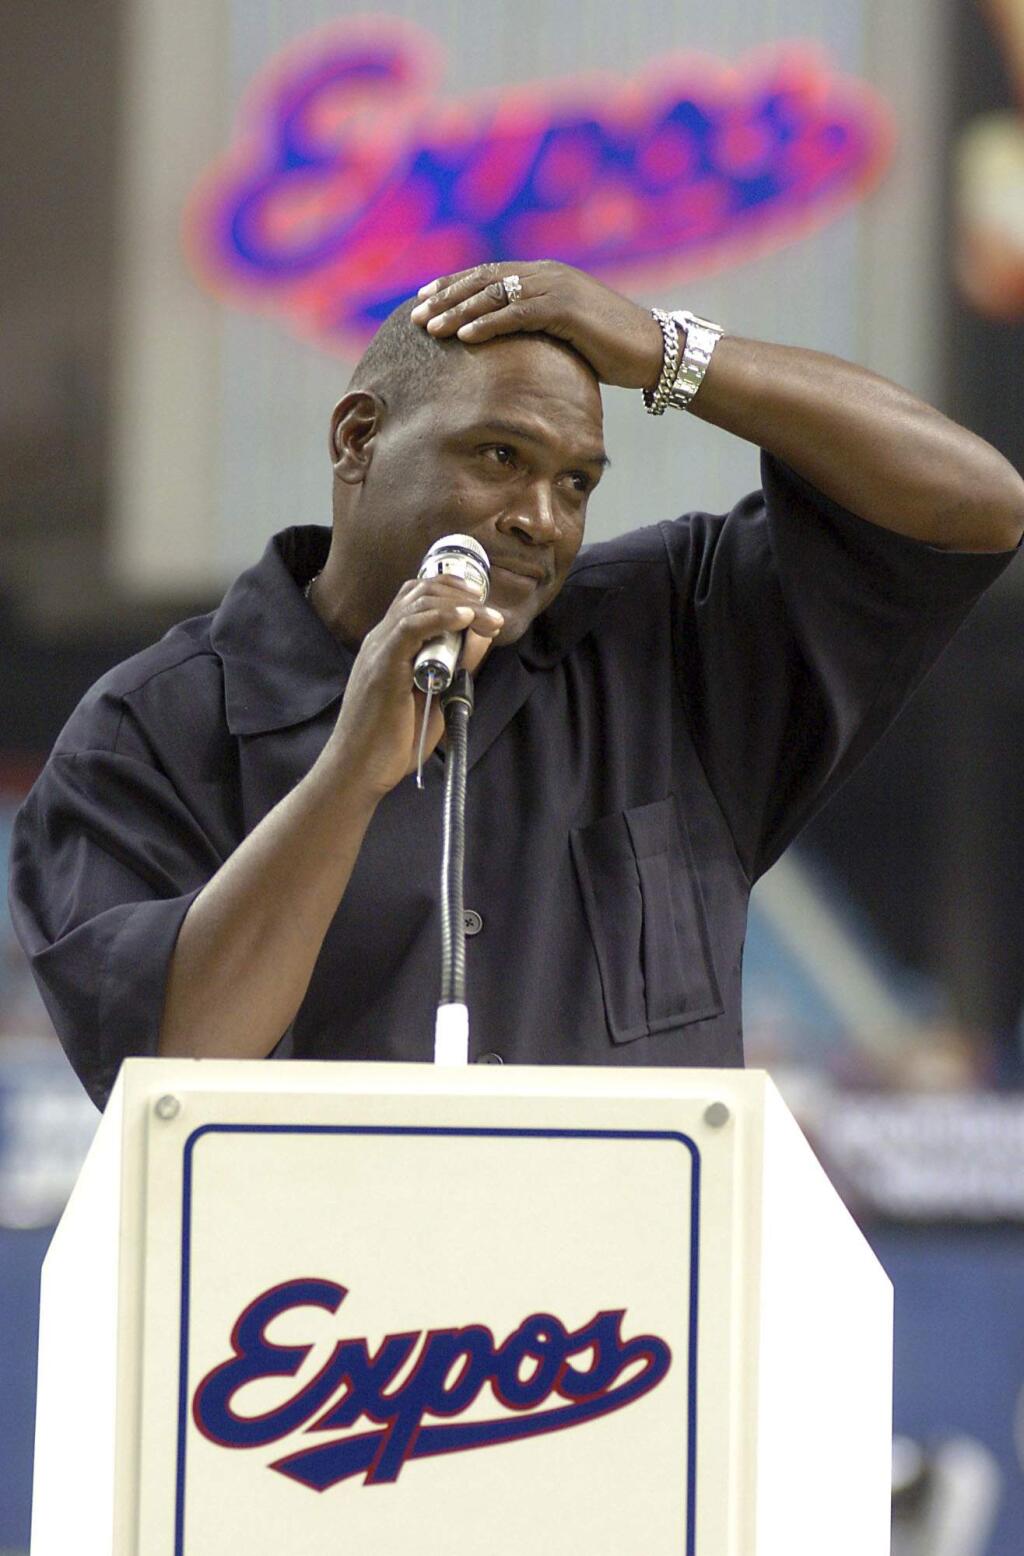 FILE - In this June 19, 2004, file photo, former Montreal Expos baseball player Tim Raines gets emotional when giving a speech to the crowd after the Montreal Expos retired his number 30 during a ceremony at the Olympic Stadium, in Montreal. Raines and Jeff Bagwell are likely to be voted into baseball's Hall of Fame on Wednesday, Jan. 18, 2017, when Trevor Hoffman and Ivan Rodriguez also could gain the honor. (Francois Roy/The Canadian press via AP, File)